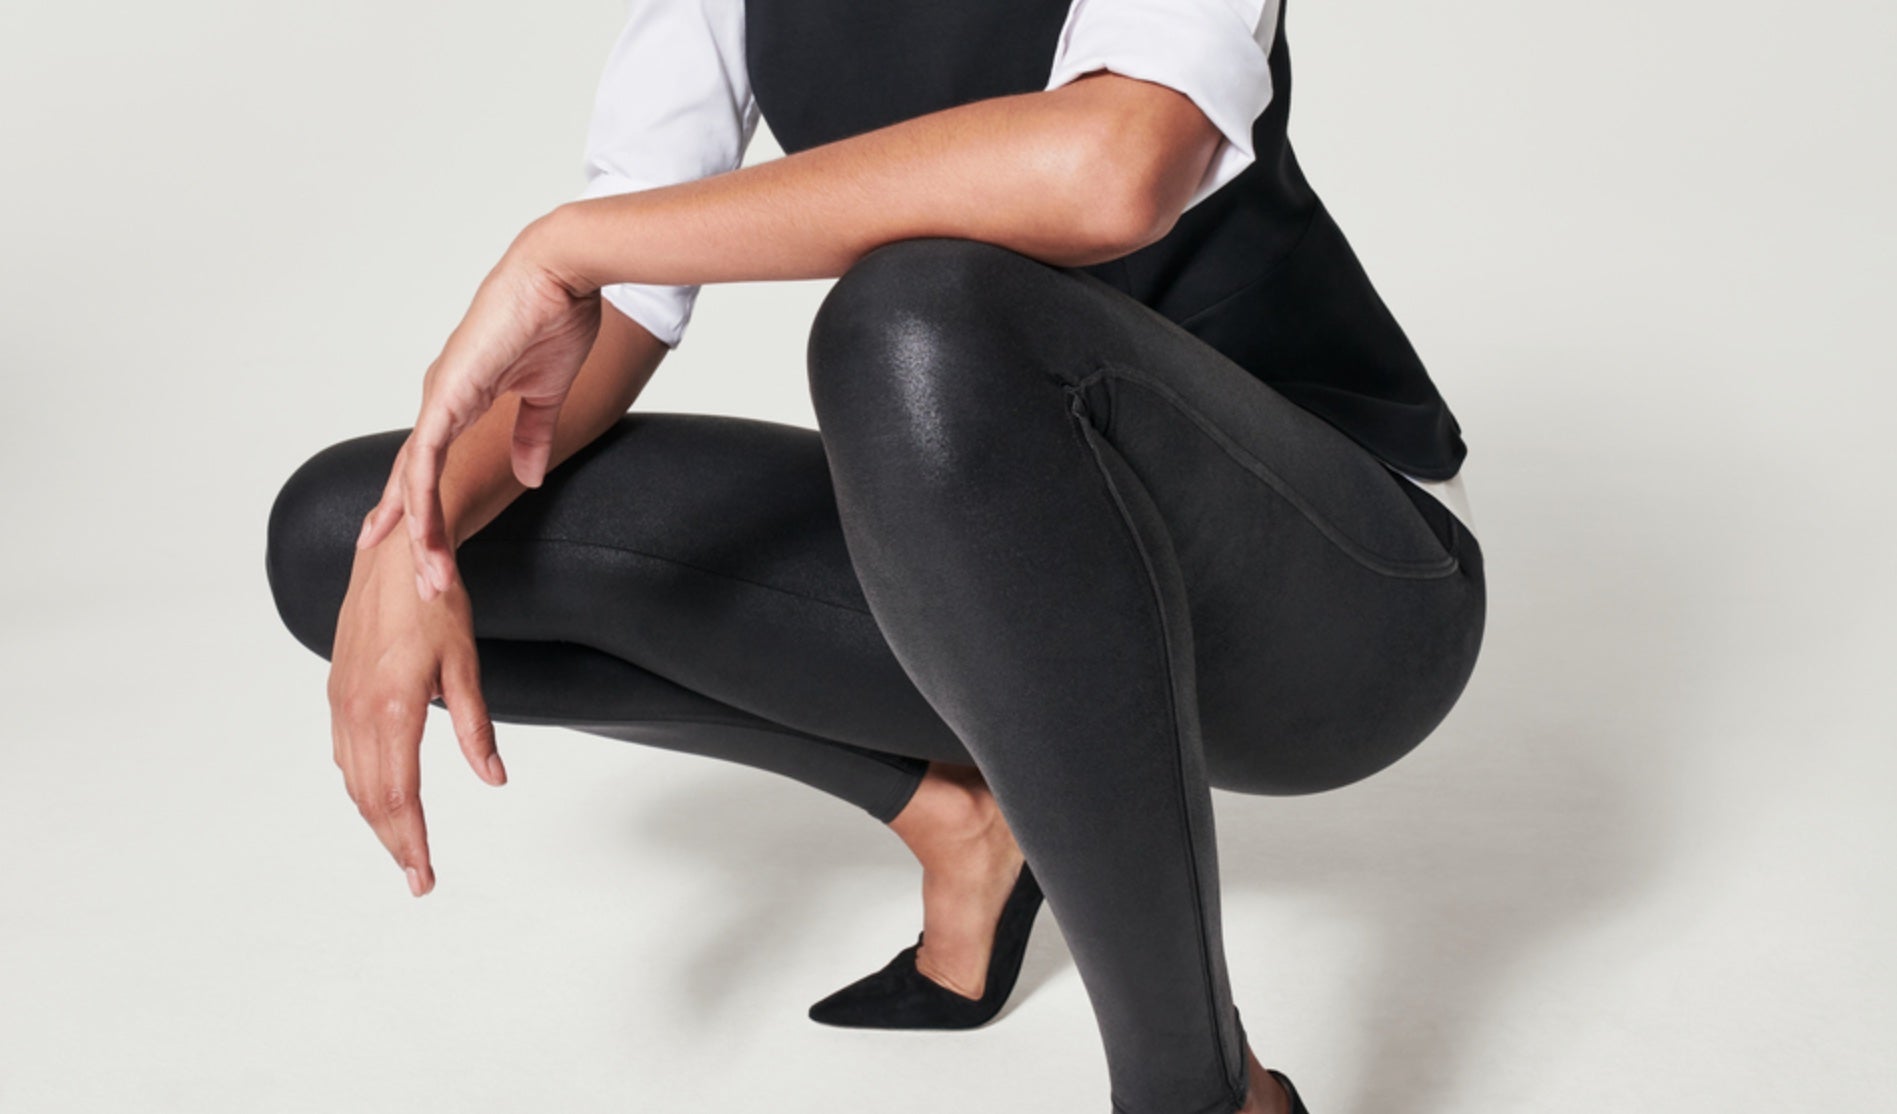 The new Spanx faux leather leggings, A.K.A. our newest fashion obsession